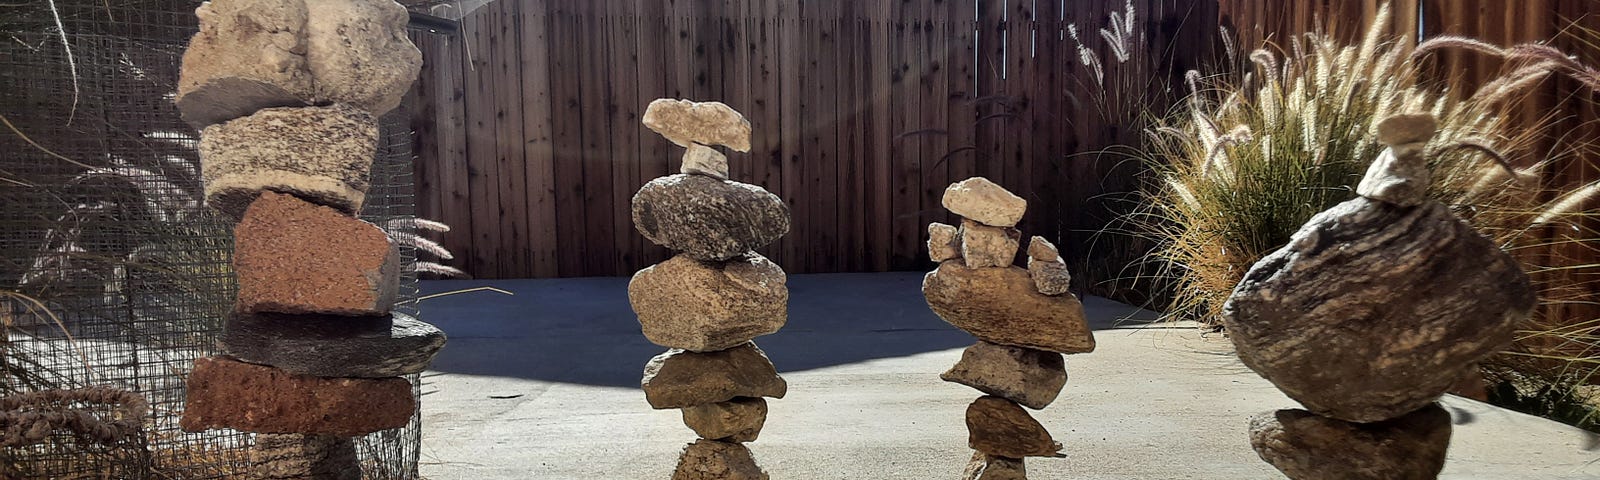 Some vertical stacks of rocks at the edge of a paved area. The stacks look like they might tip over.